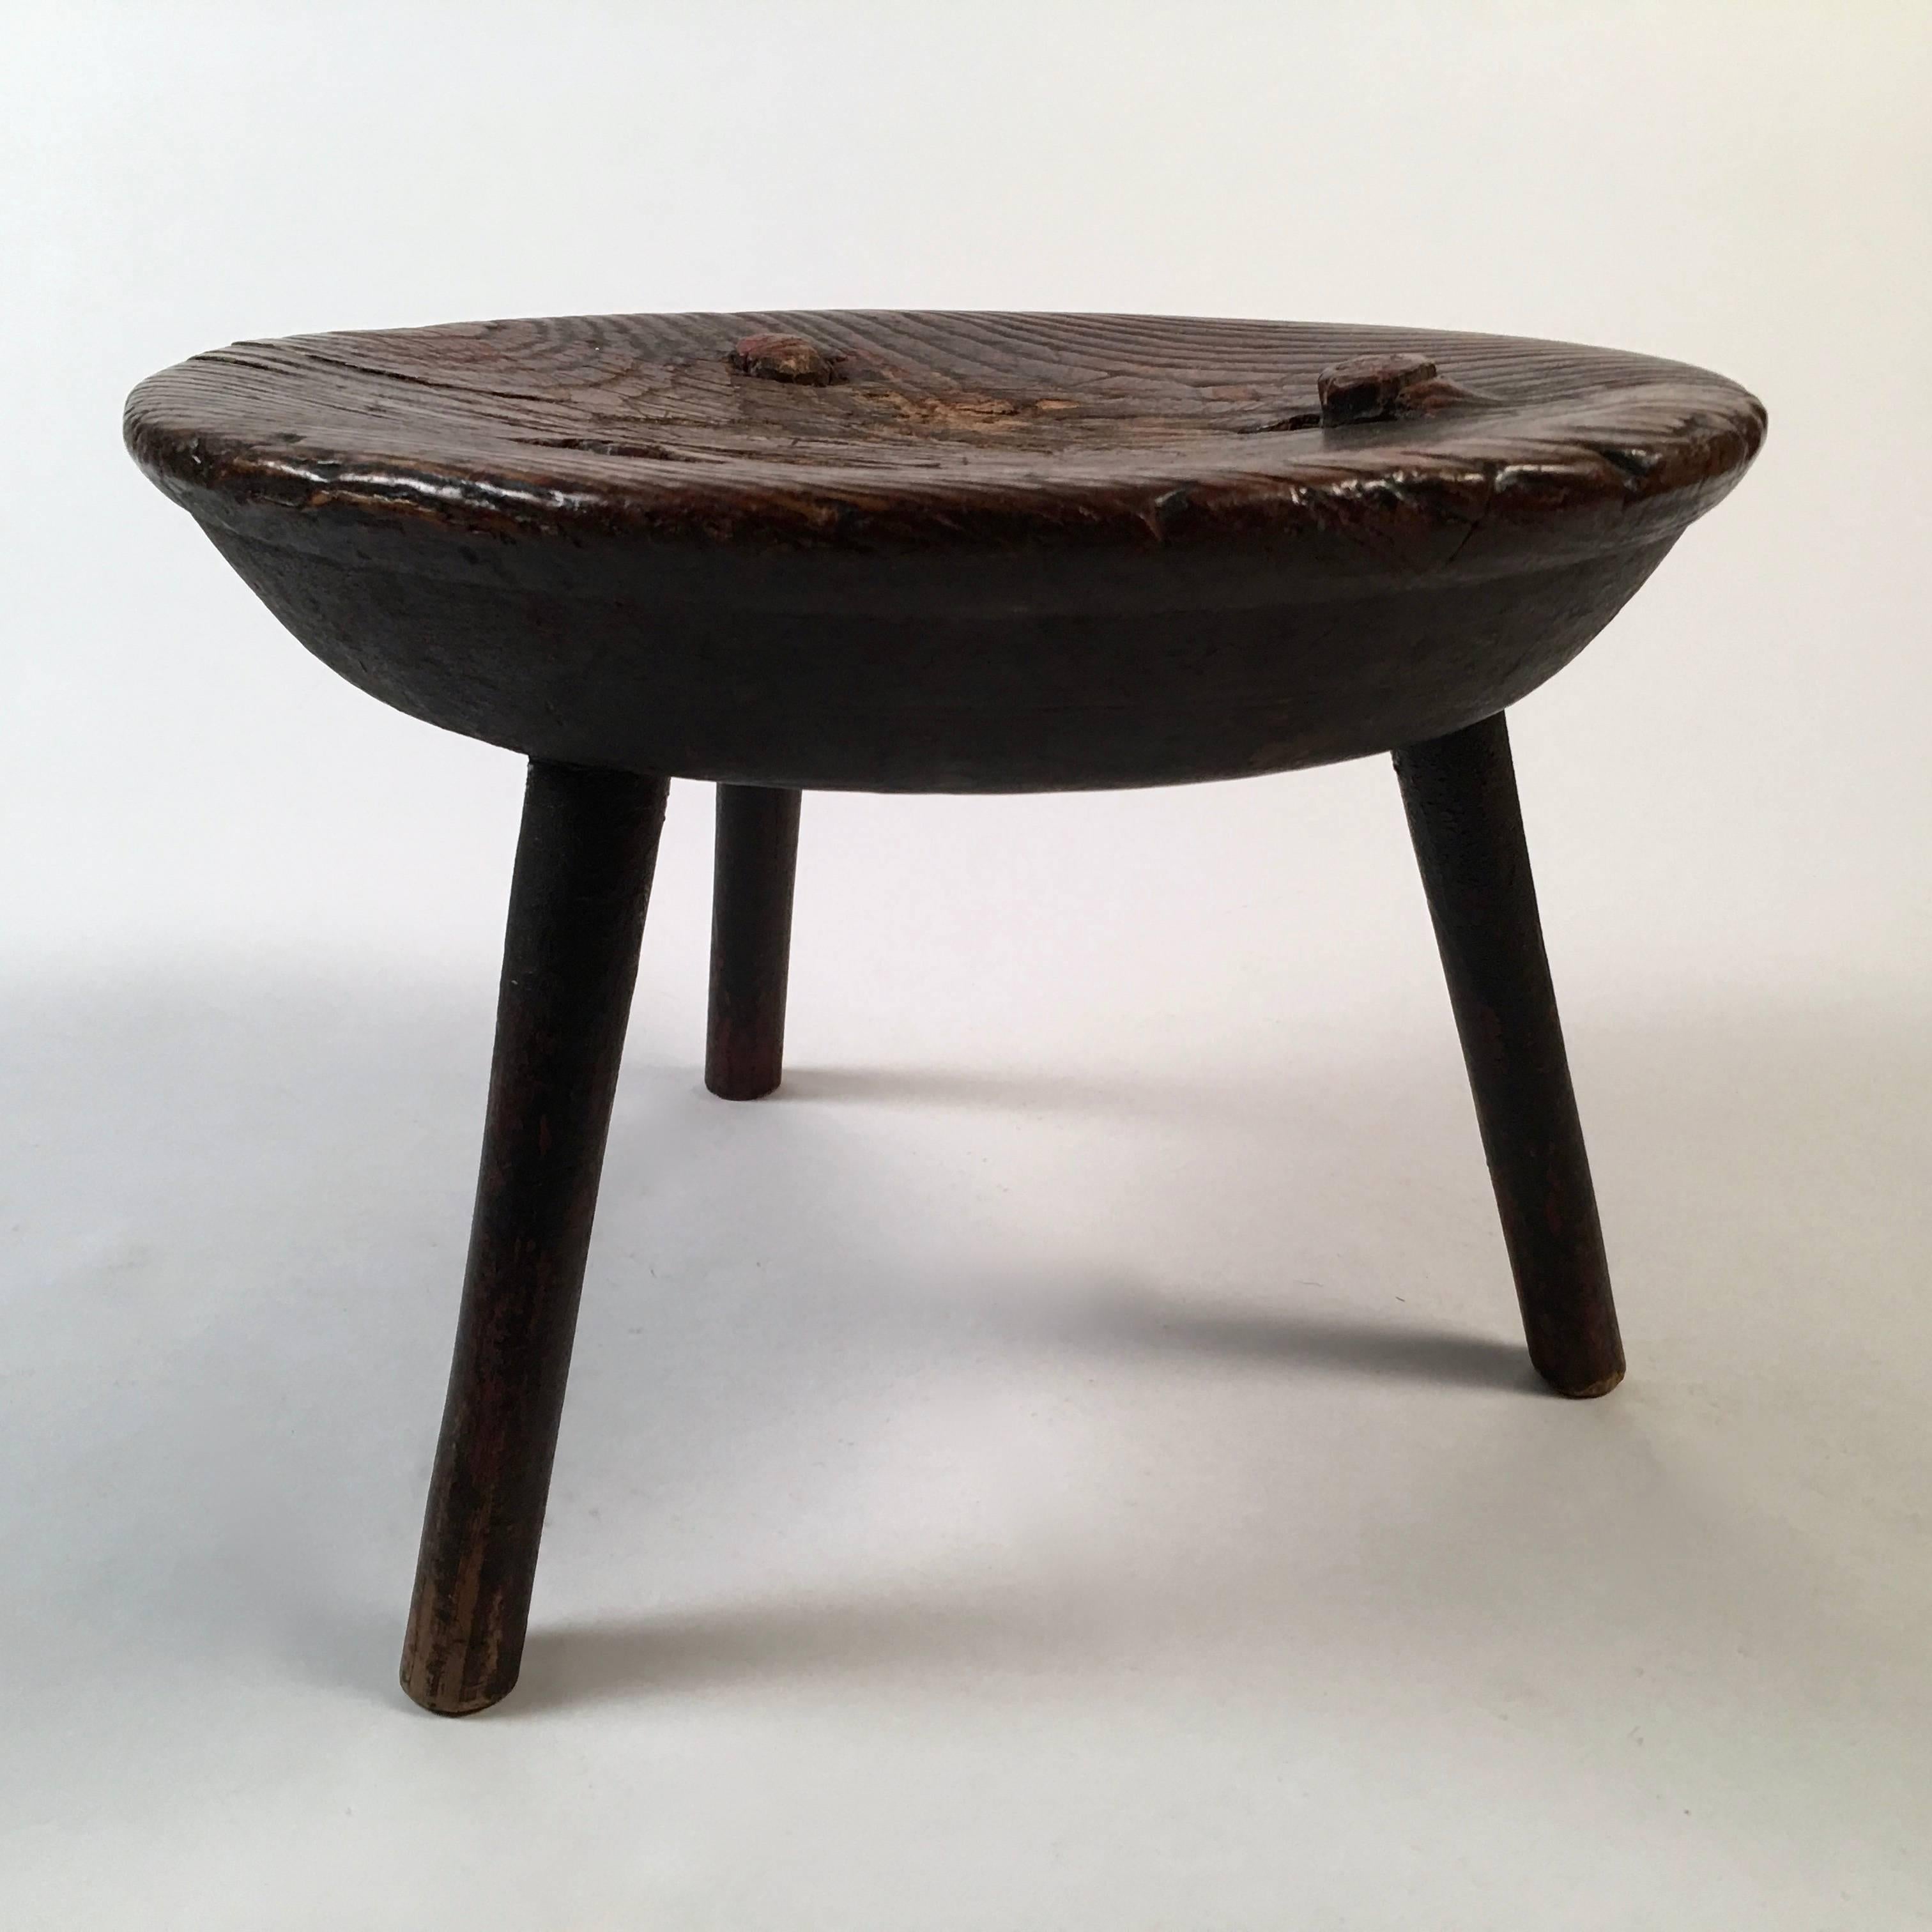 An 18th century round milking stool, with wonderful character, the thick, tapering round solid oak (or elm?) top, retaining traces of old red surface, with 3 spayed circular pegged legs. Great color, texture and patina. Solid and useful as a low